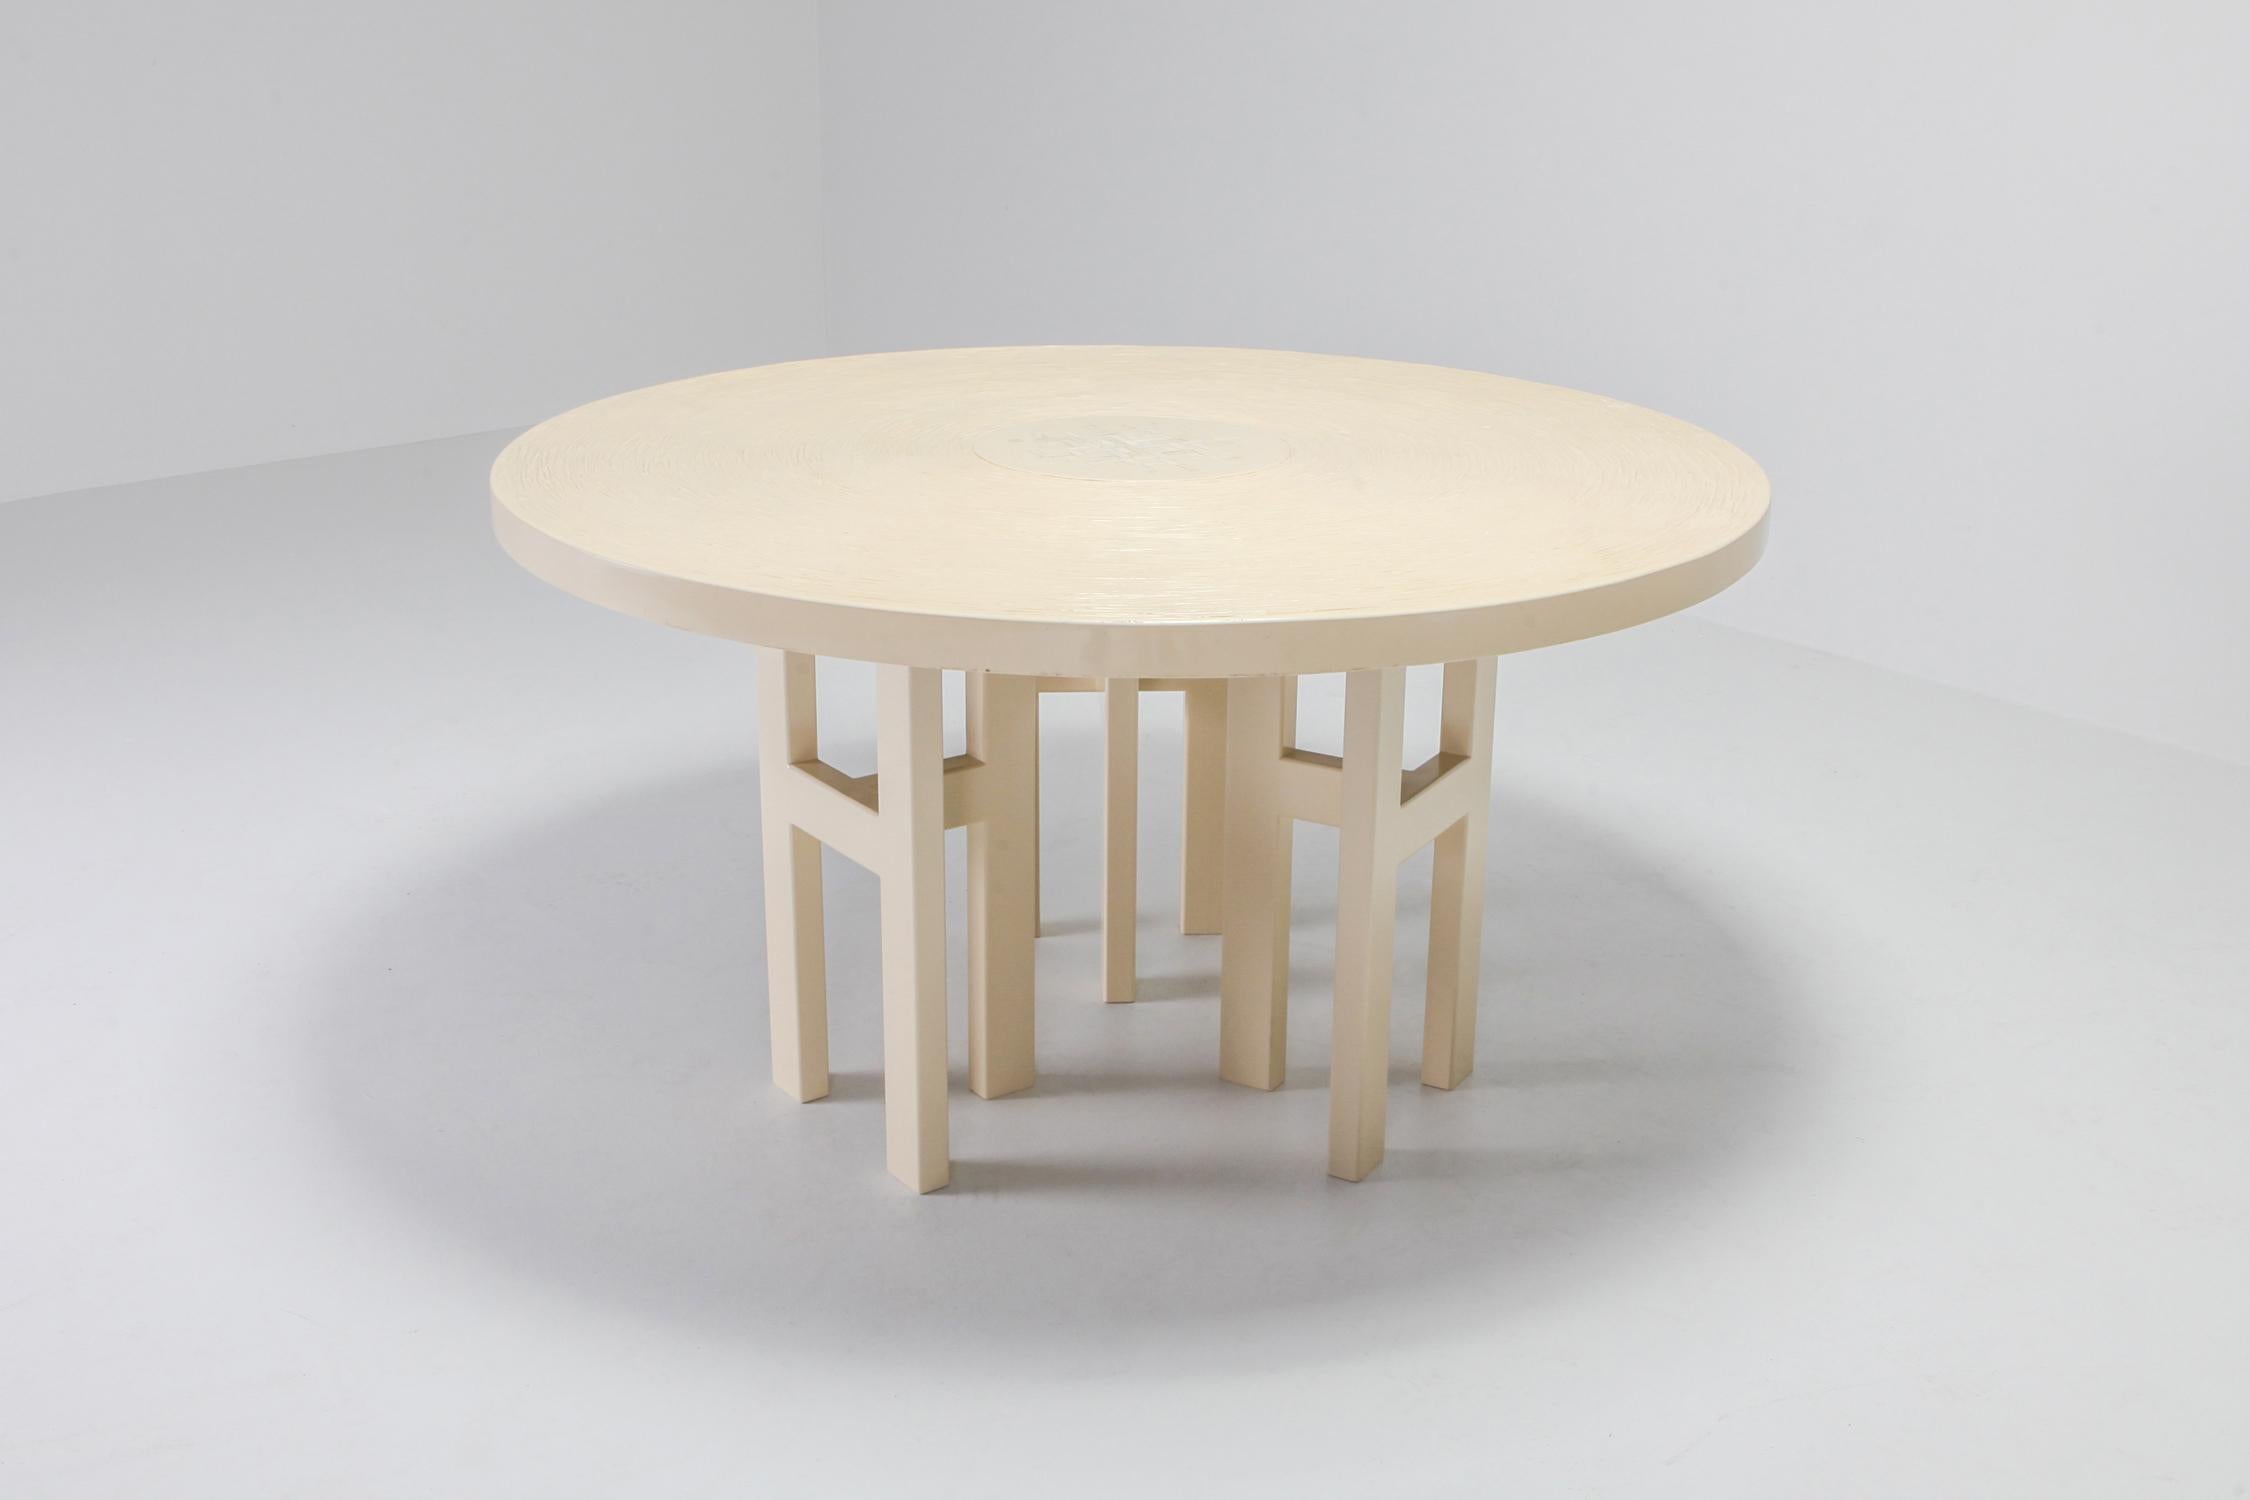 Post-Modern Cream Lacquer Resin Dining Table by Dresse